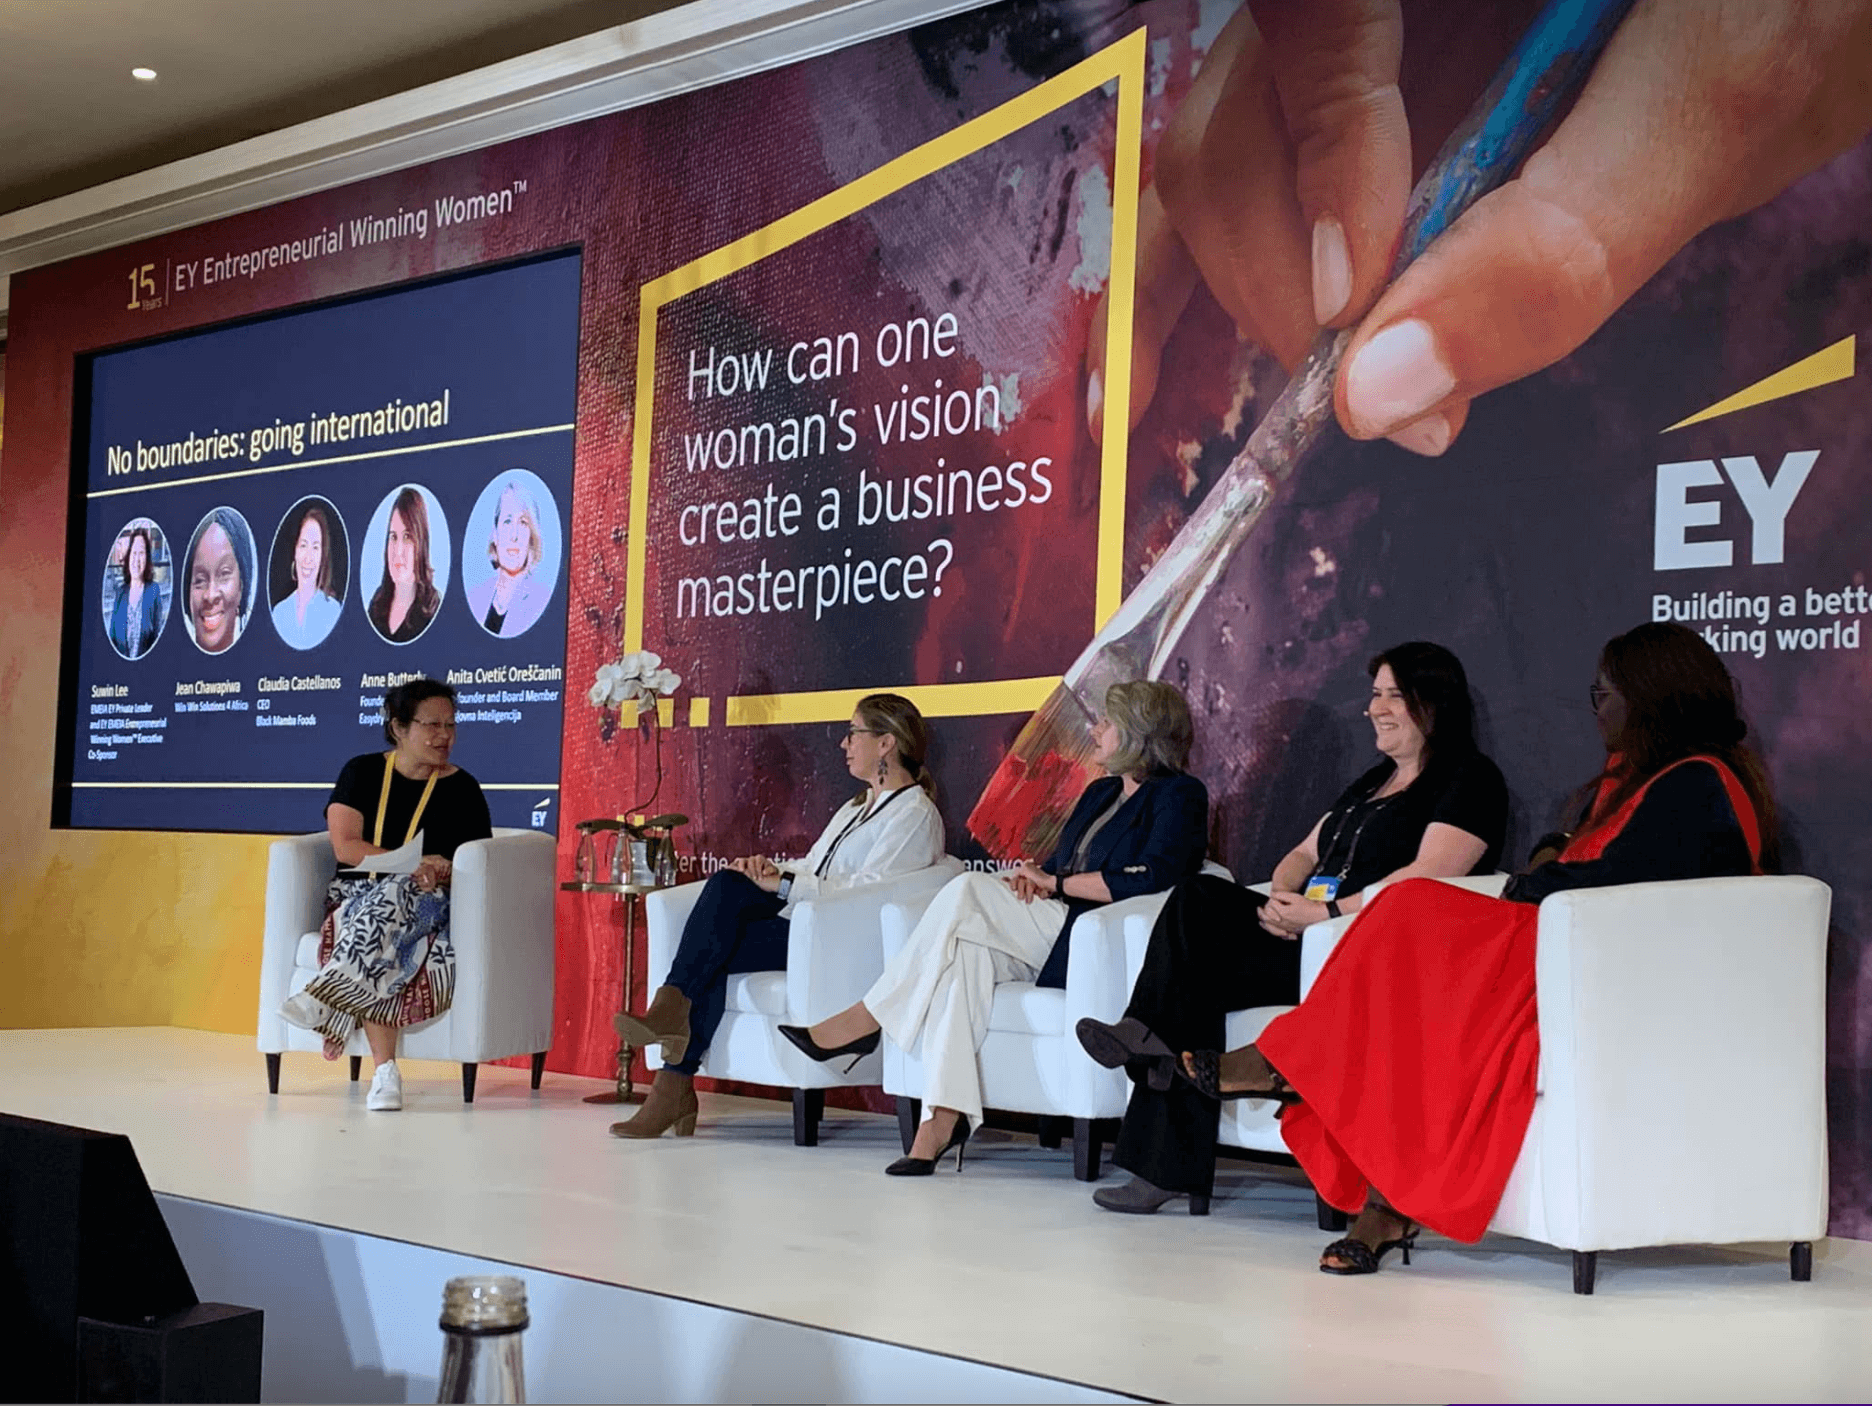 Anne Butterly, Easydry CEO and founder, was recently invited by Ernst and Young to their ‘Winning Women’ conference in Cape Town recently. EY provides program participants access to their vast resources, rich networks and know-how, helping to strengthen their abilities to become market leaders.